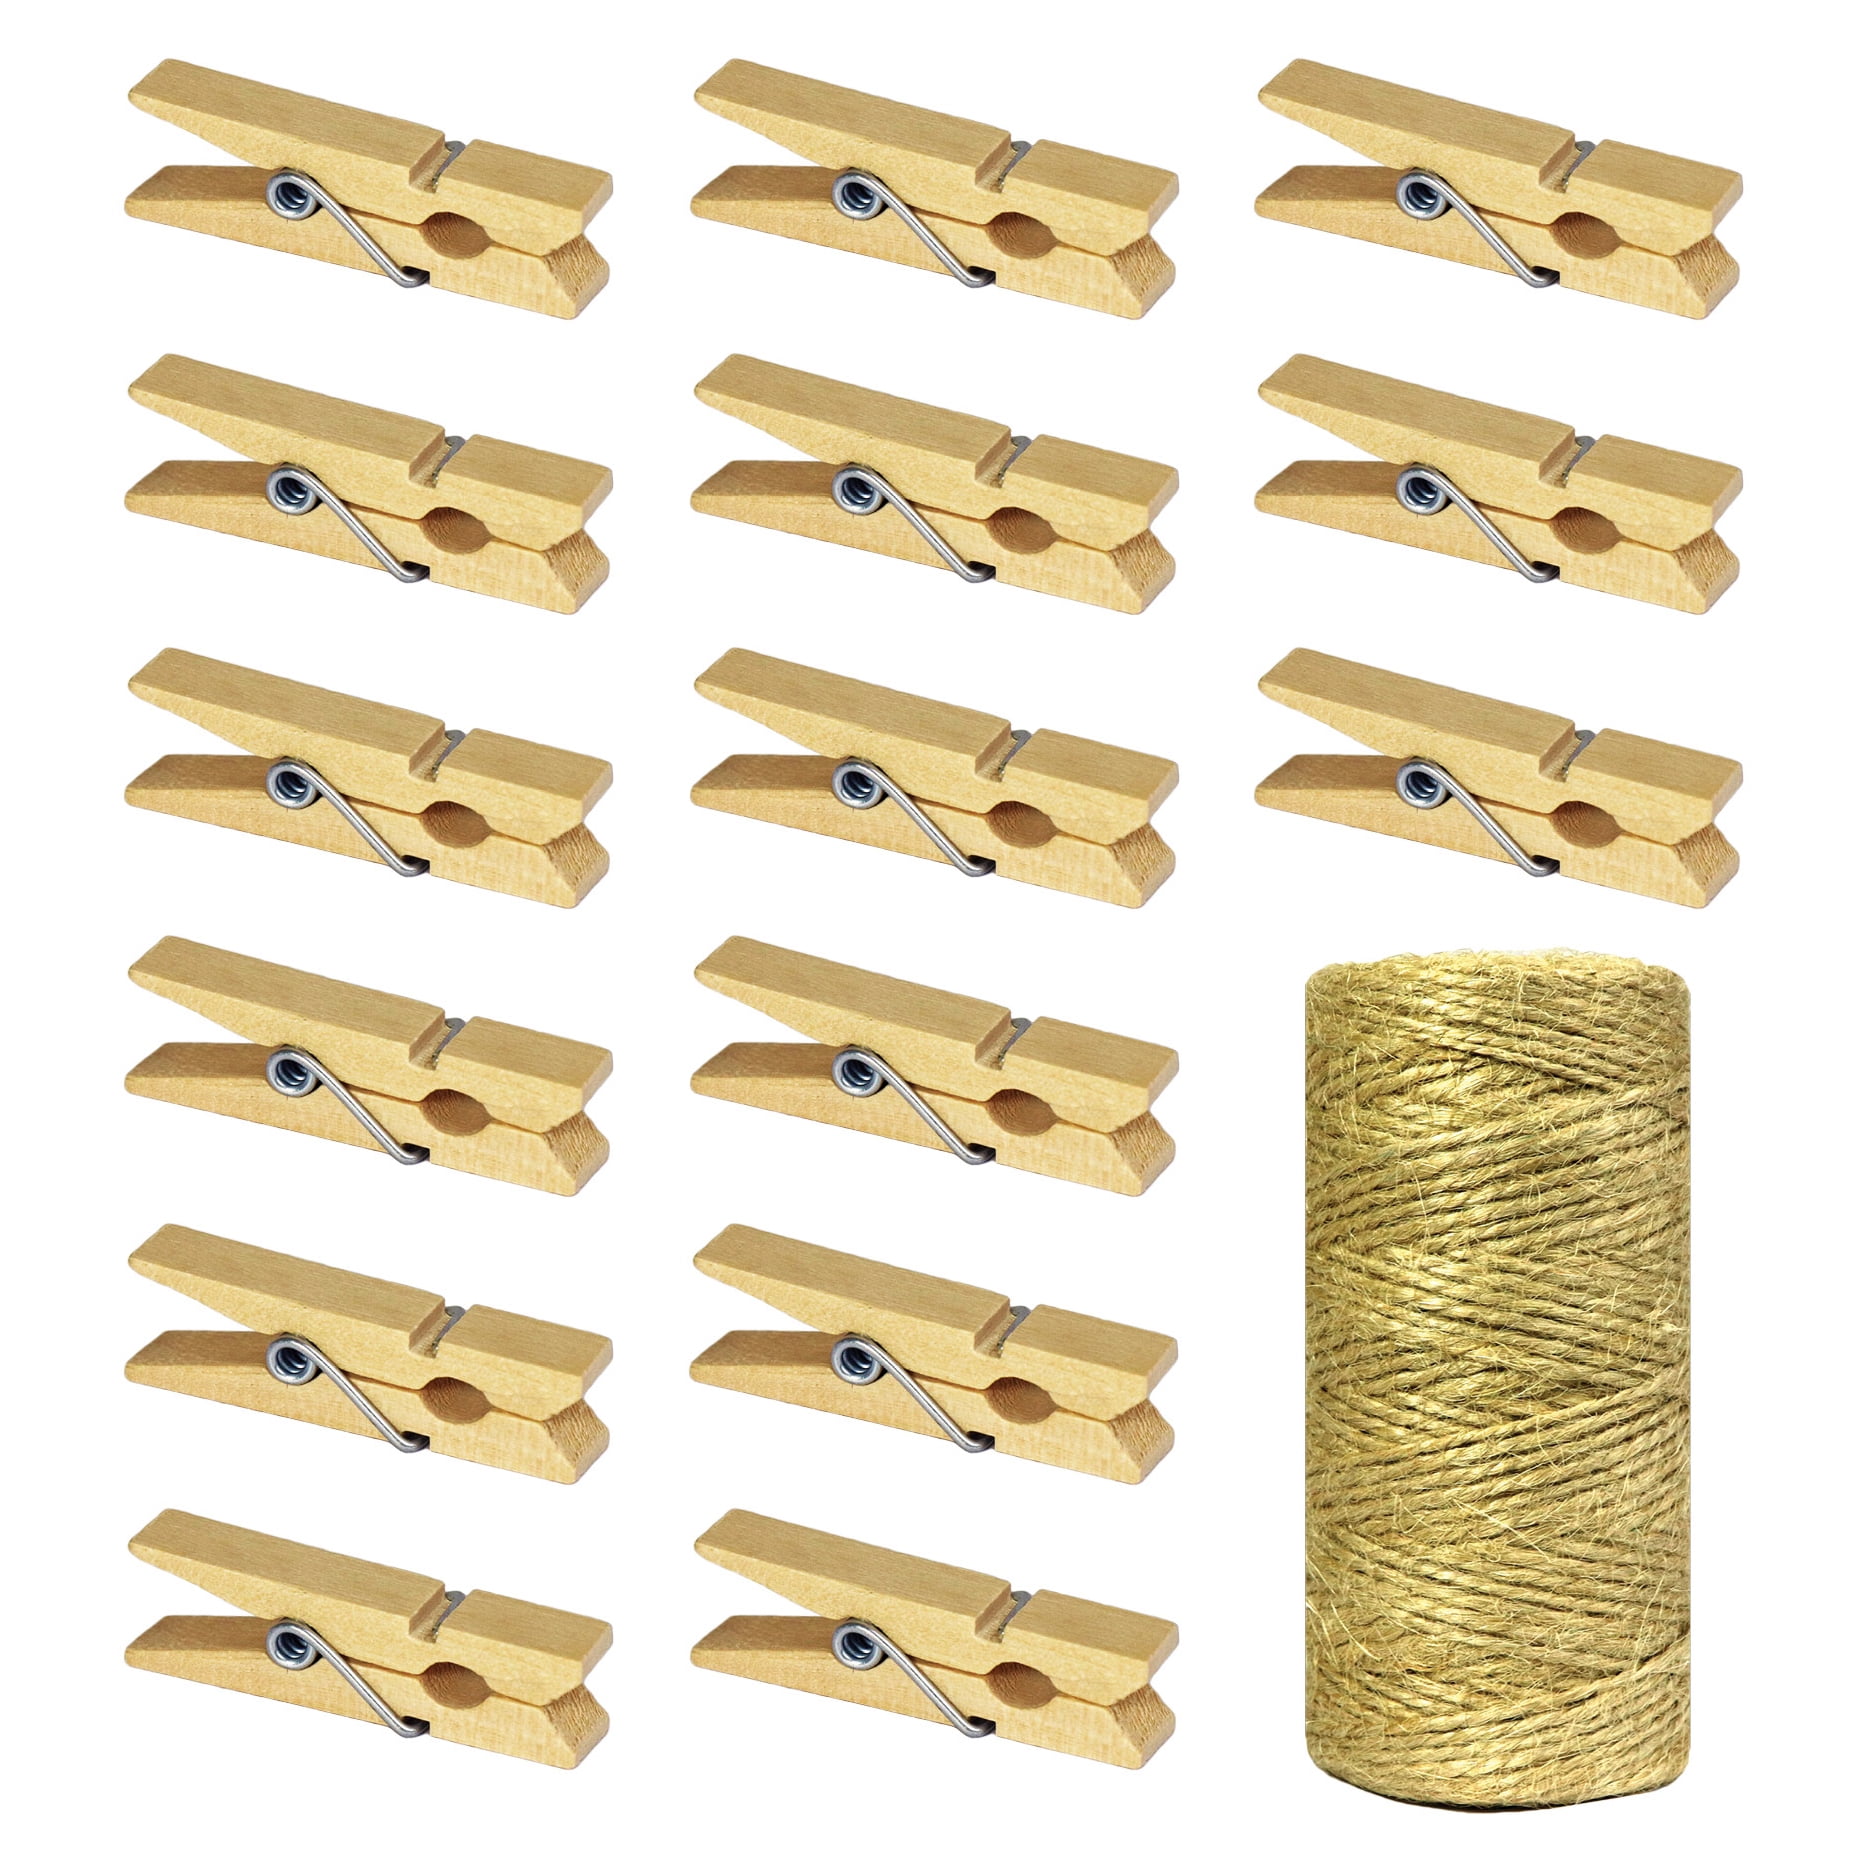 Final Clearance! 50Pcs Mini Natural Wooden Clip Clothes DIY Photo Paper Peg  Pin Clothespin Craft Clips School Office Stationery Wood Clamp